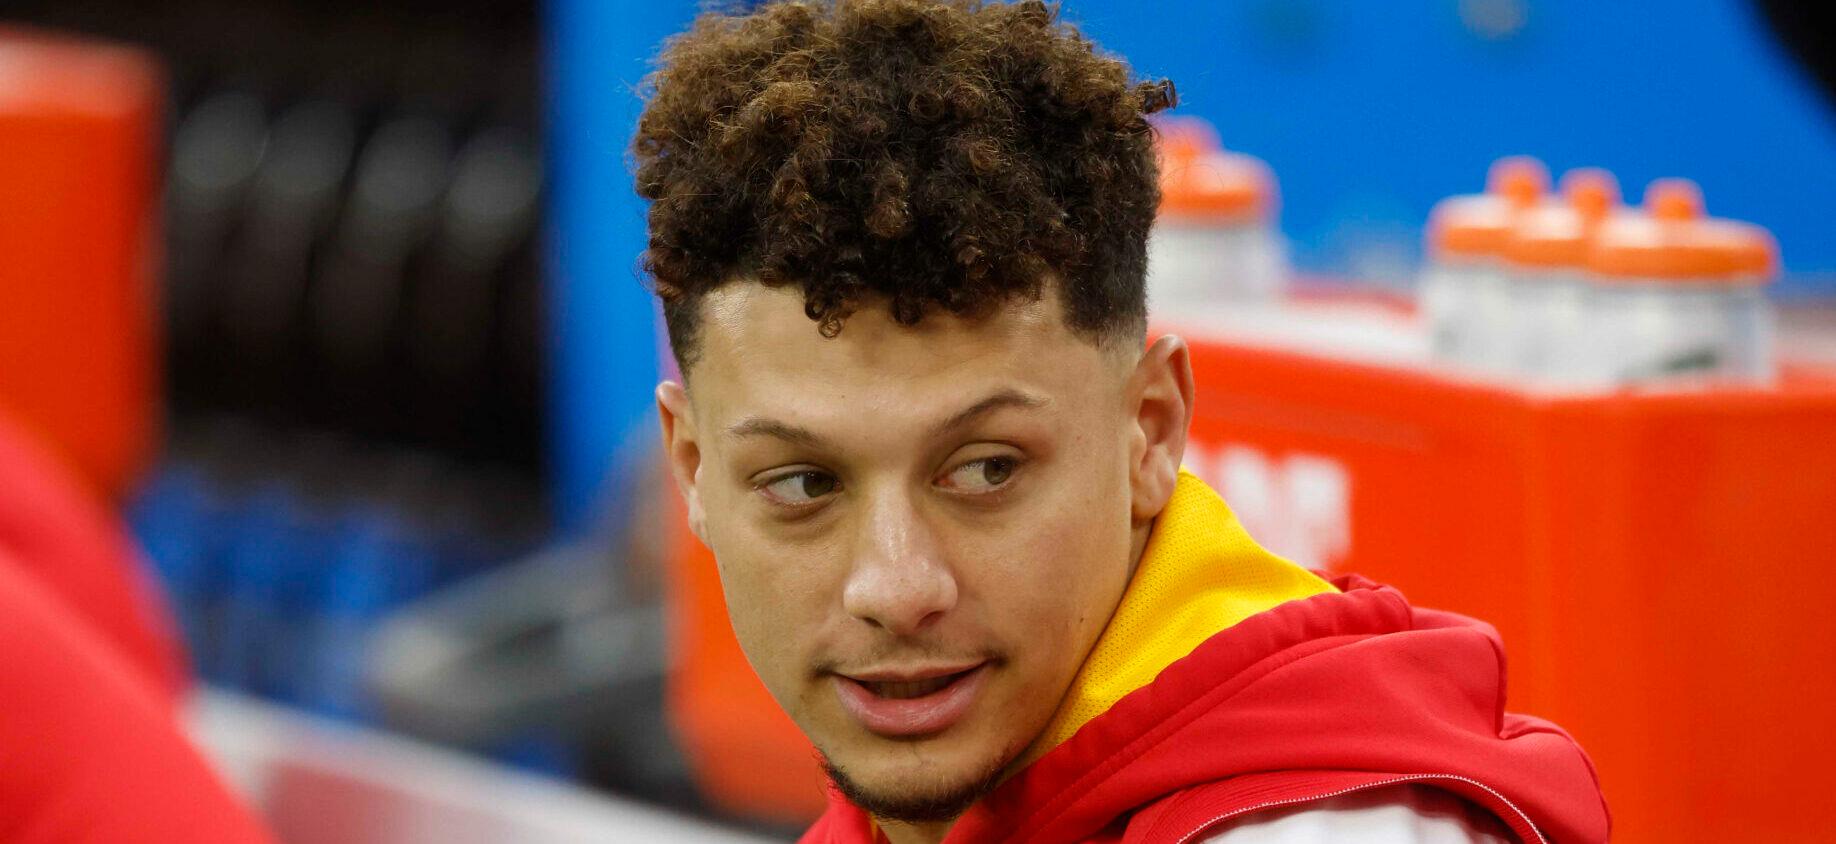 Patrick Mahomes at a NFL game 2021: Chiefs vs Chargers DEC 16